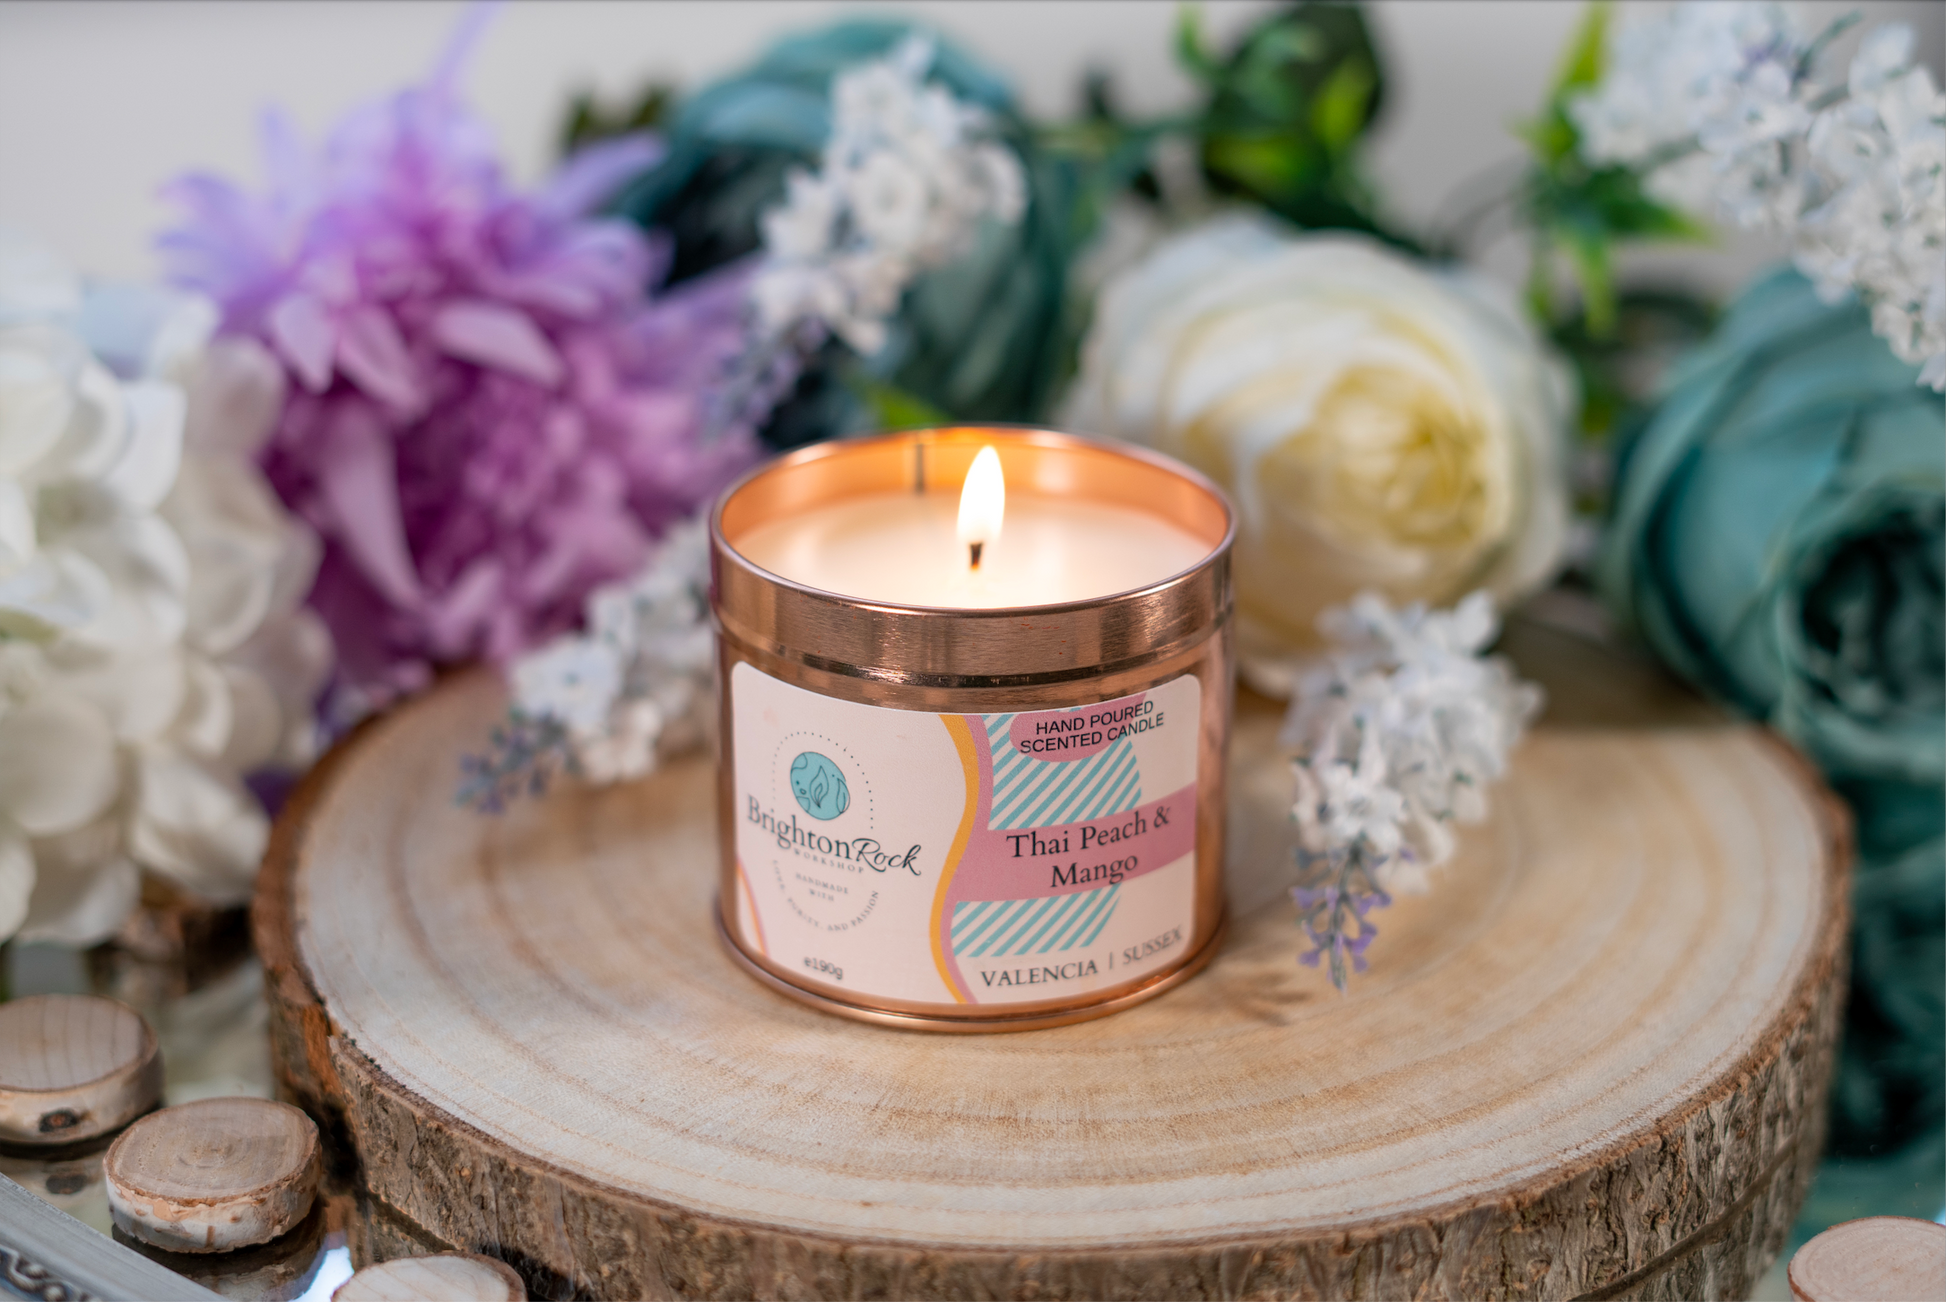 thai peach, mango, and citrus scented candle in a rose gold tin with matching lid. Brighton Rock Workshop strongly-scented candles. 190g eco-friendly, sustainable, recyclable packaging, vegan friendly and cruelty free